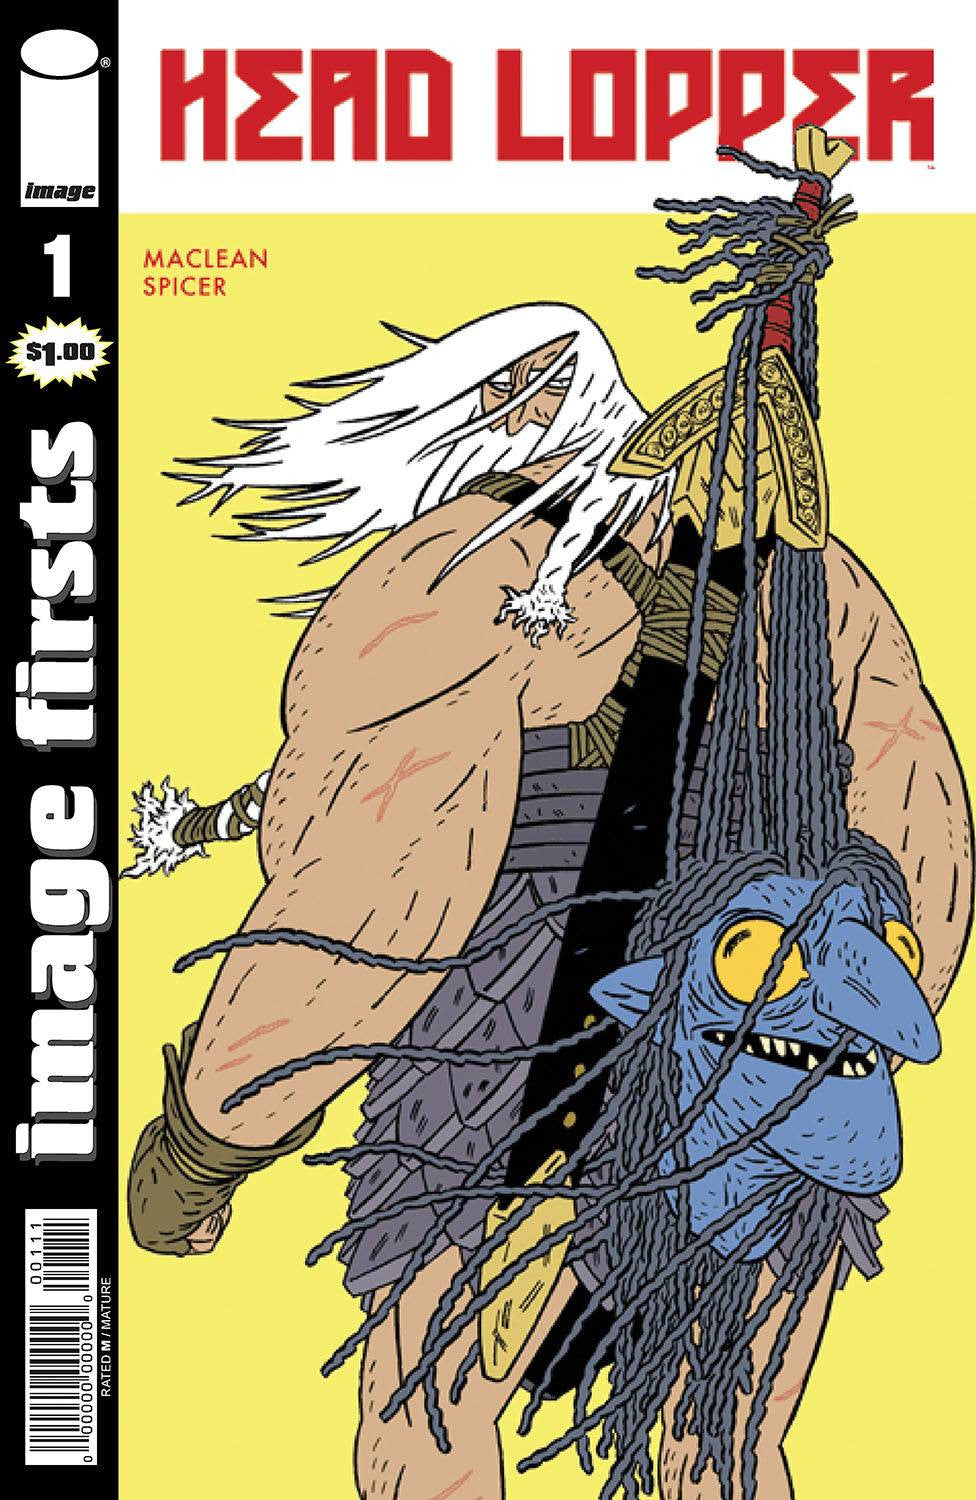 IMAGE FIRSTS HEAD LOPPER #1 COVER